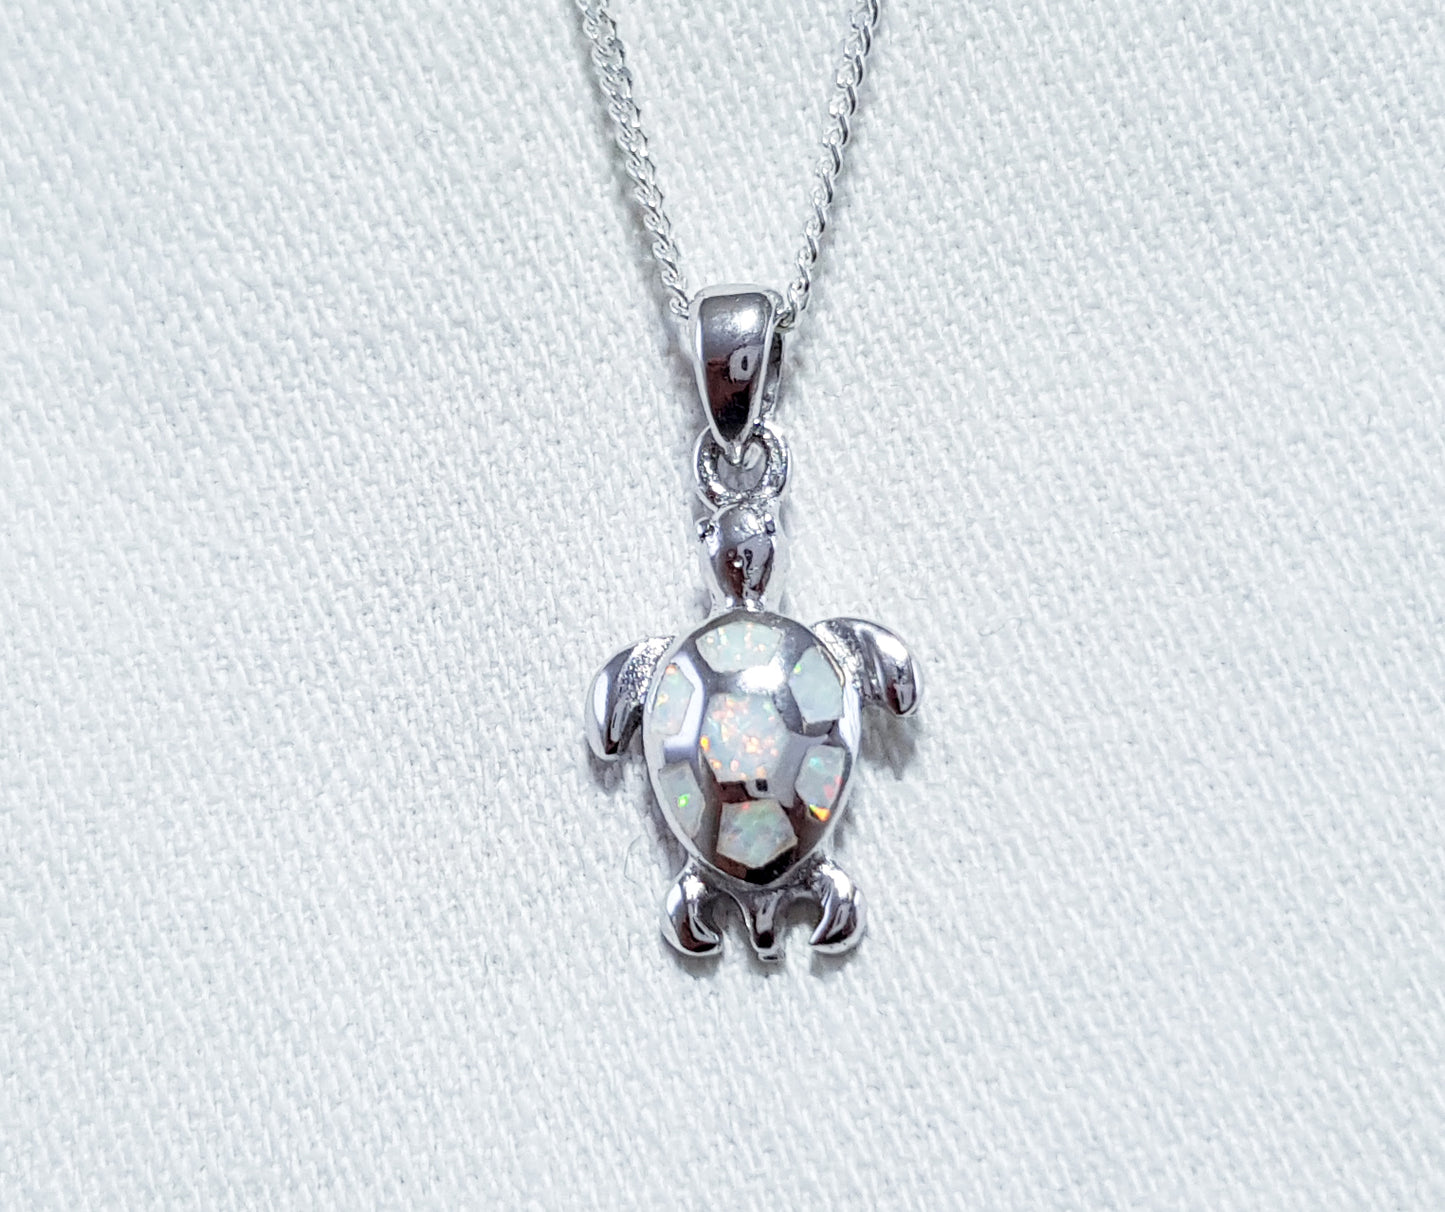 Sterling Silver Turtle Pendant with Crushed Opal Inlay